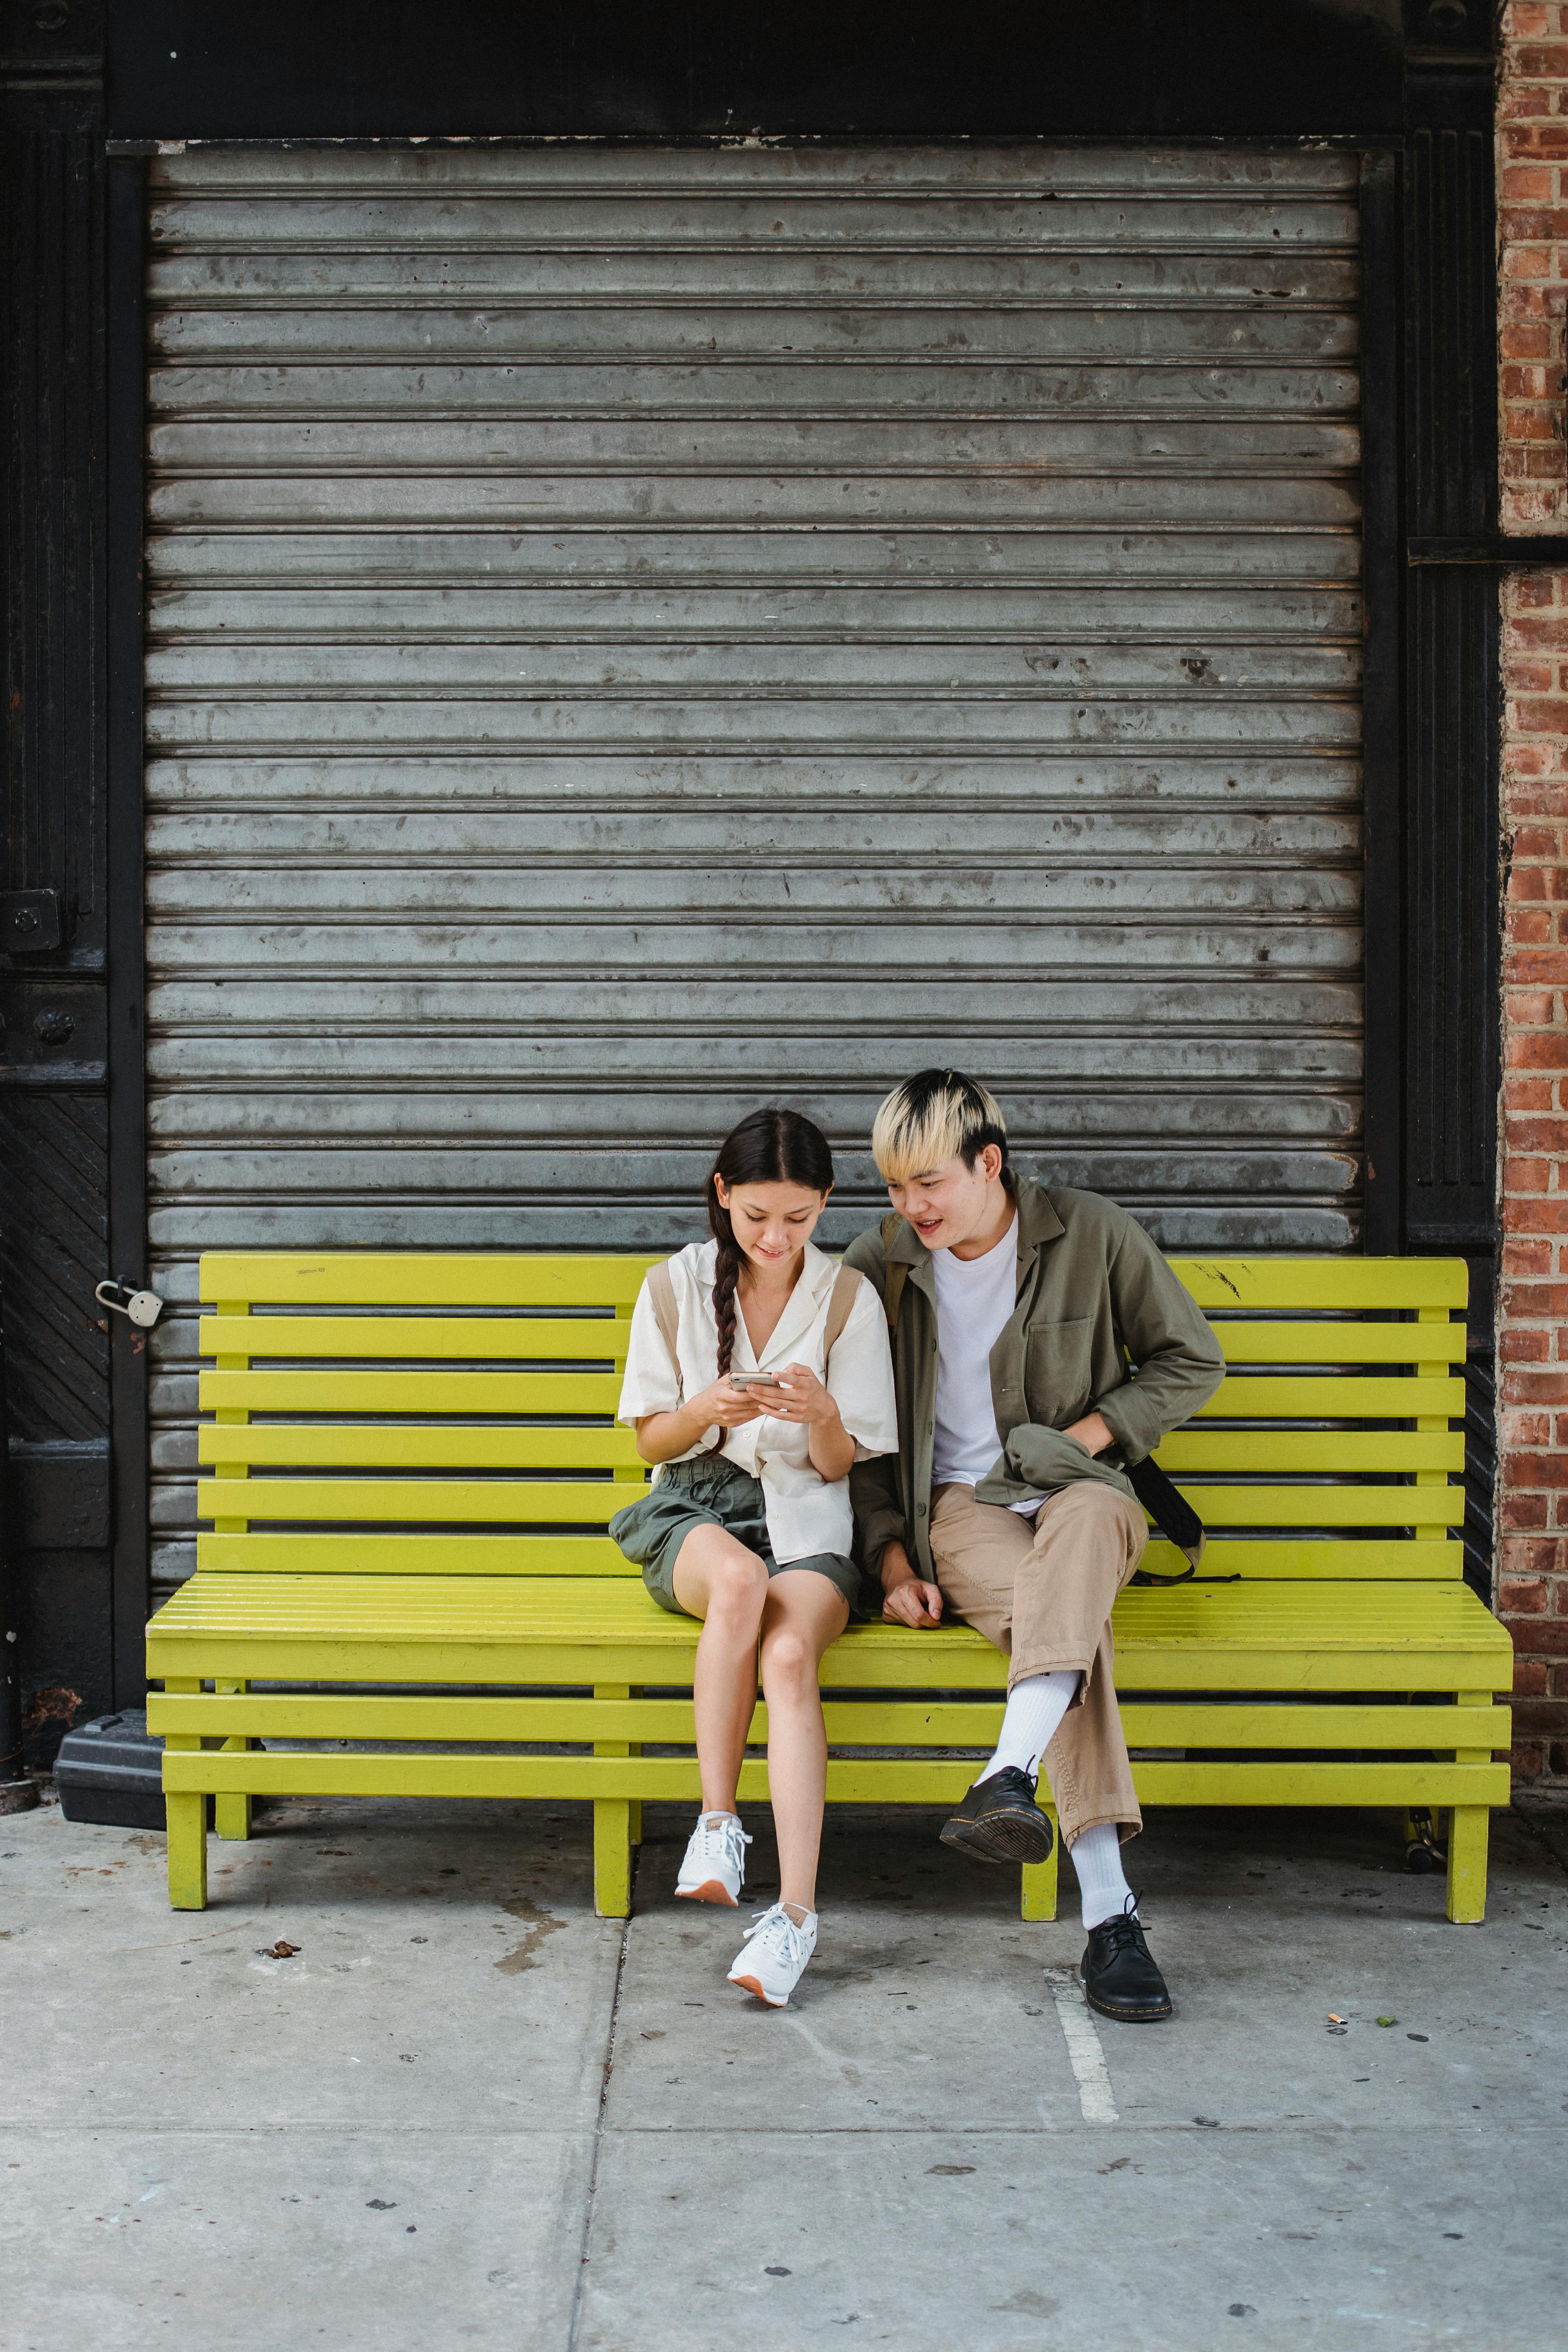 calm couple sitting on bench on street